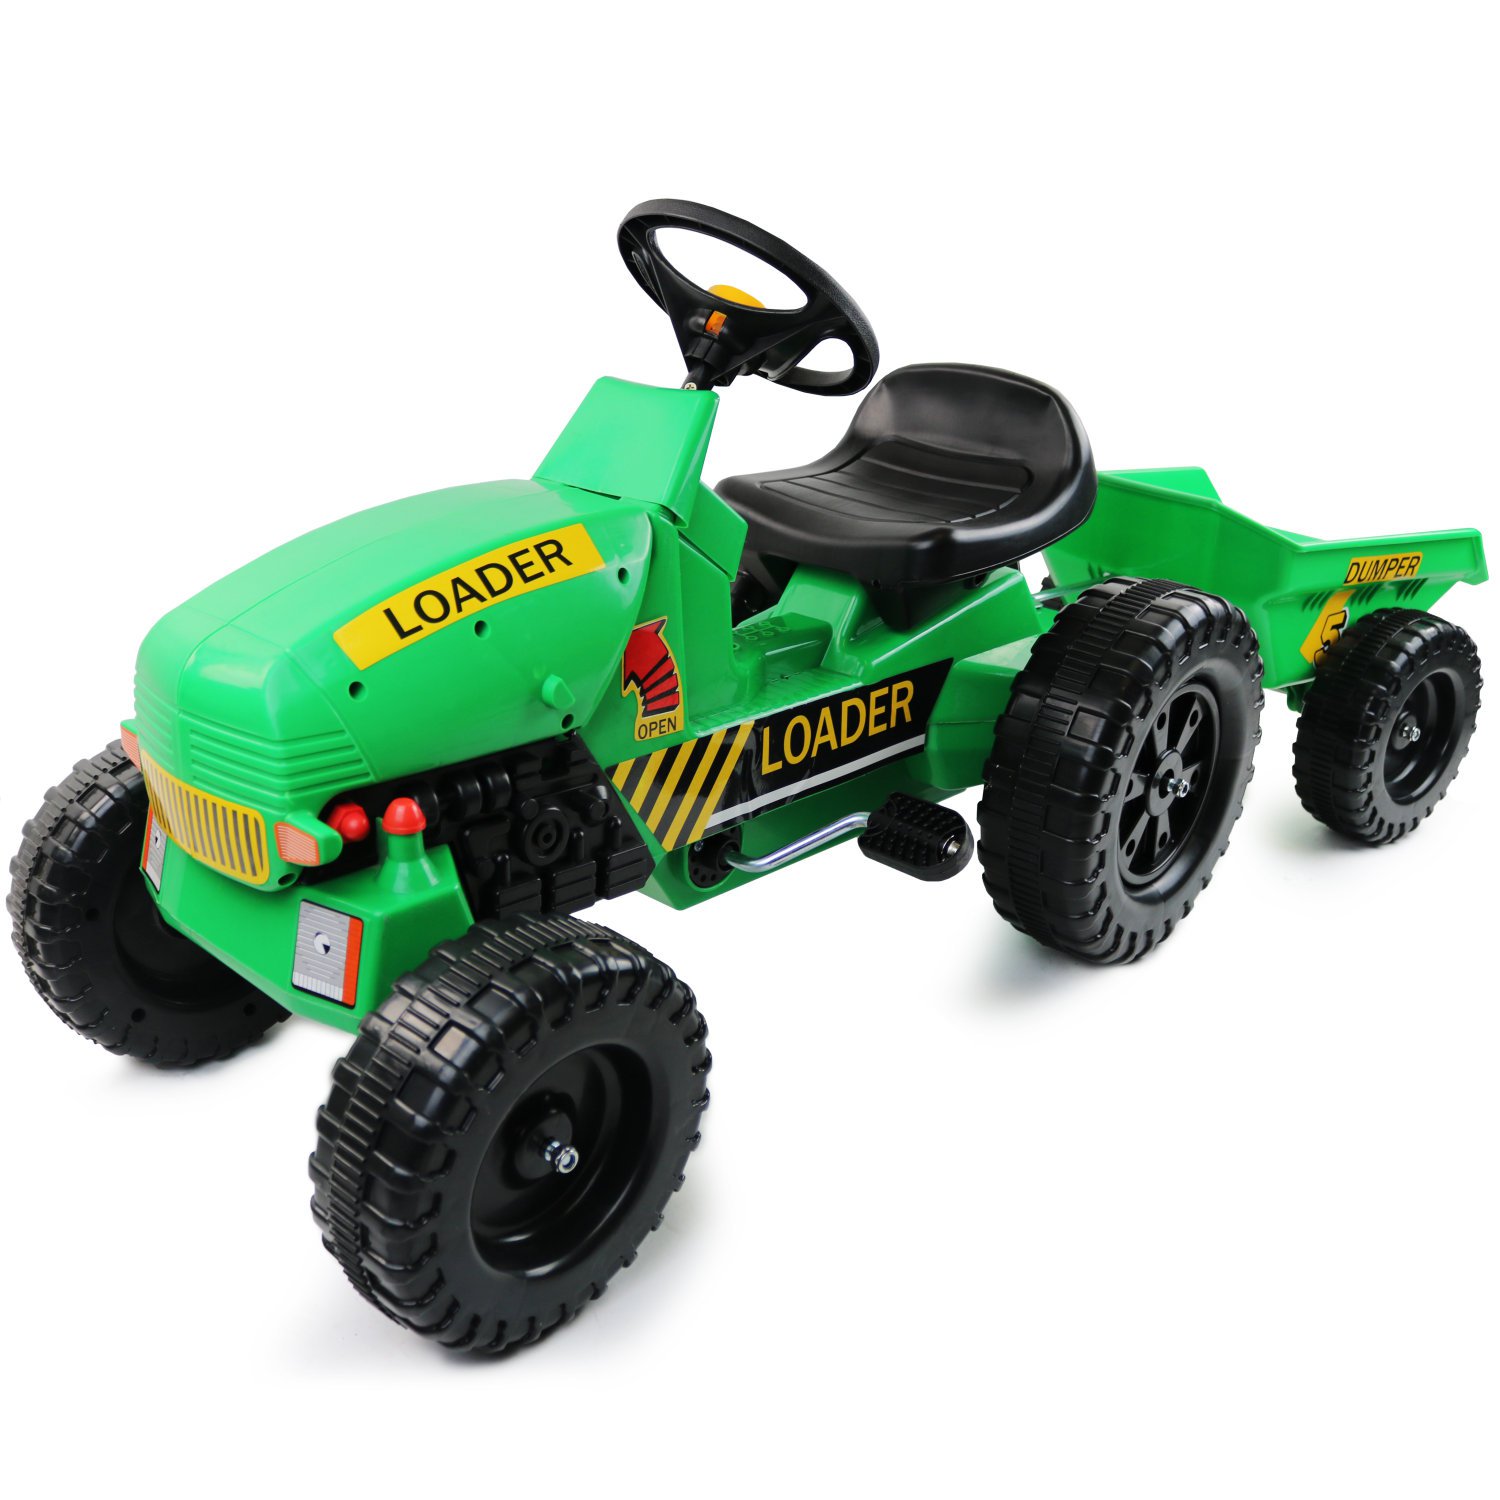 Childrens Pedal Ride on Green Super Tractor With Toy Trailer